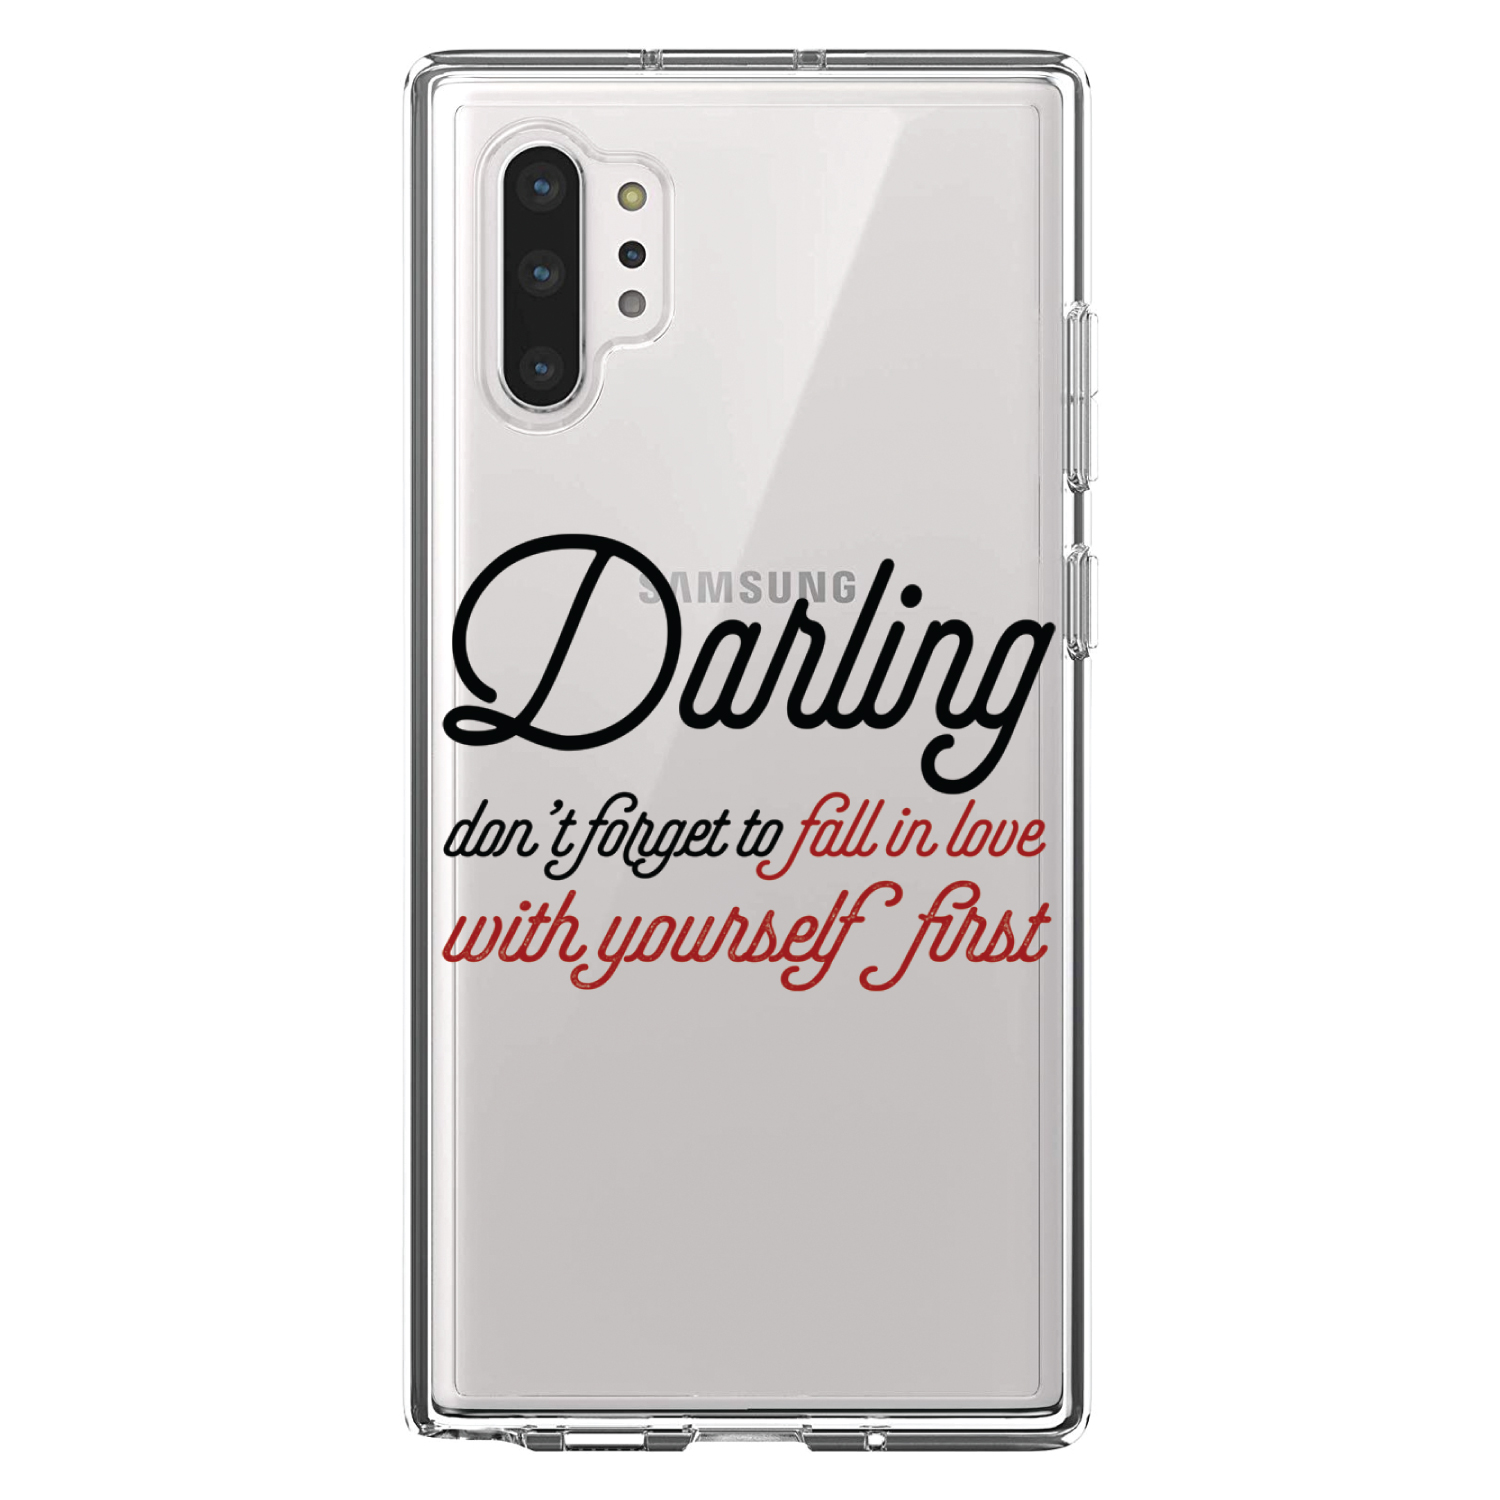 DistinctInk Clear Shockproof Hybrid Case for Galaxy Note 10 PLUS (6.8" Screen) - TPU Bumper Acrylic Back Tempered Glass Screen Protector - Darling Don't Forget to Fall In Love with Yourself - image 1 of 1